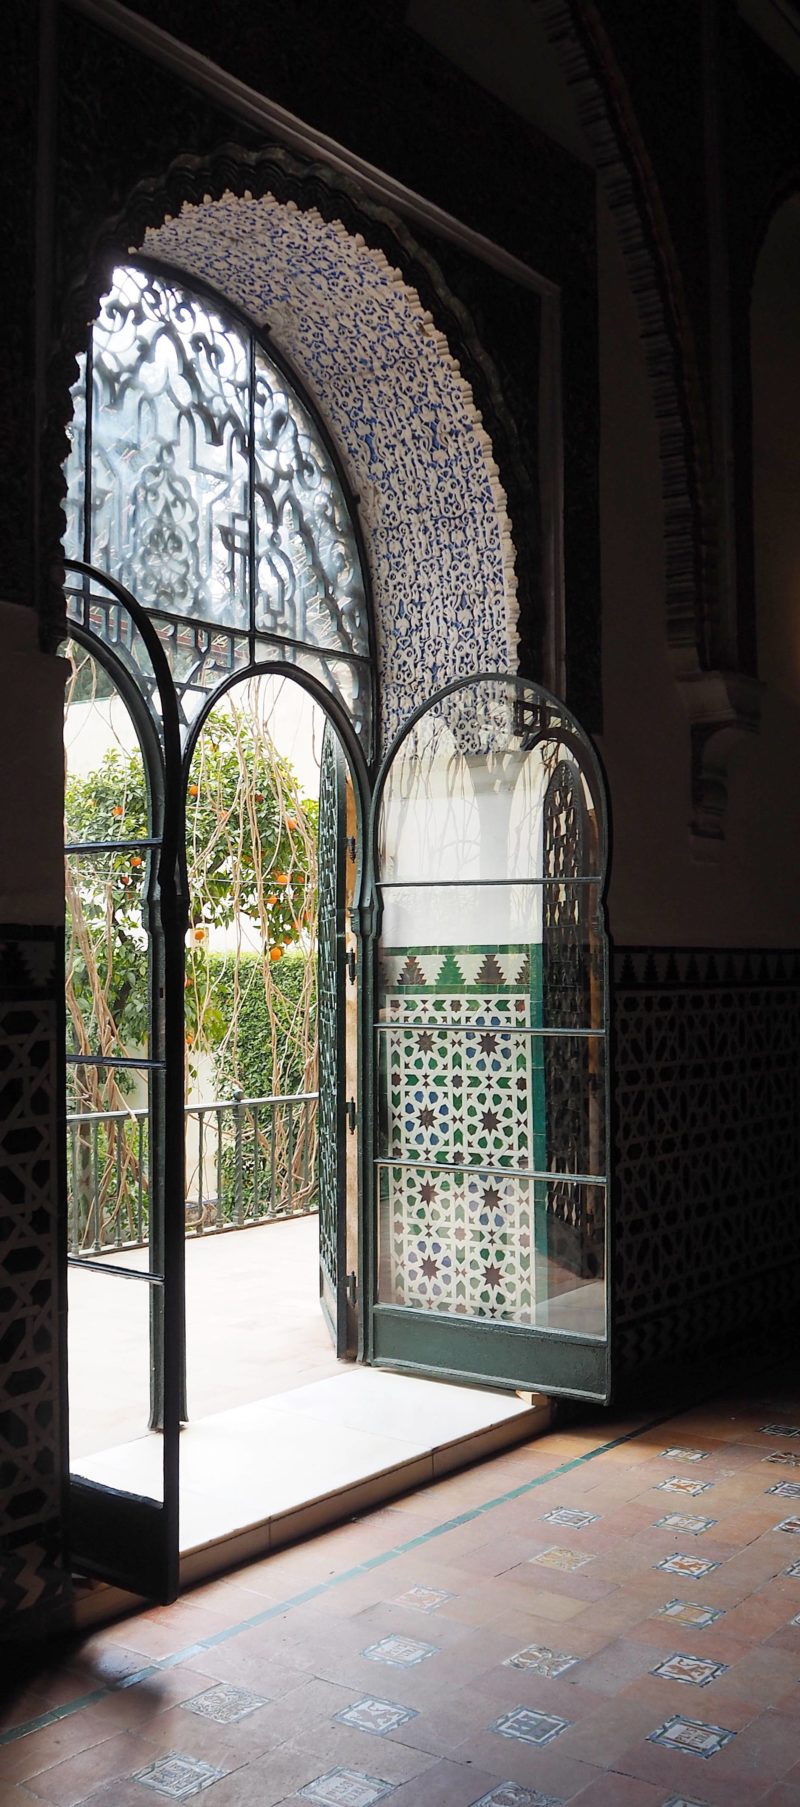 Spain Travel InspirationThinking of visiting Seville on your next vacation to Europe then a visit to the Alcazar of Seville is a must. Click the link to read my Seville travel tips and also see more photos inside this beautiful palace in Seville.